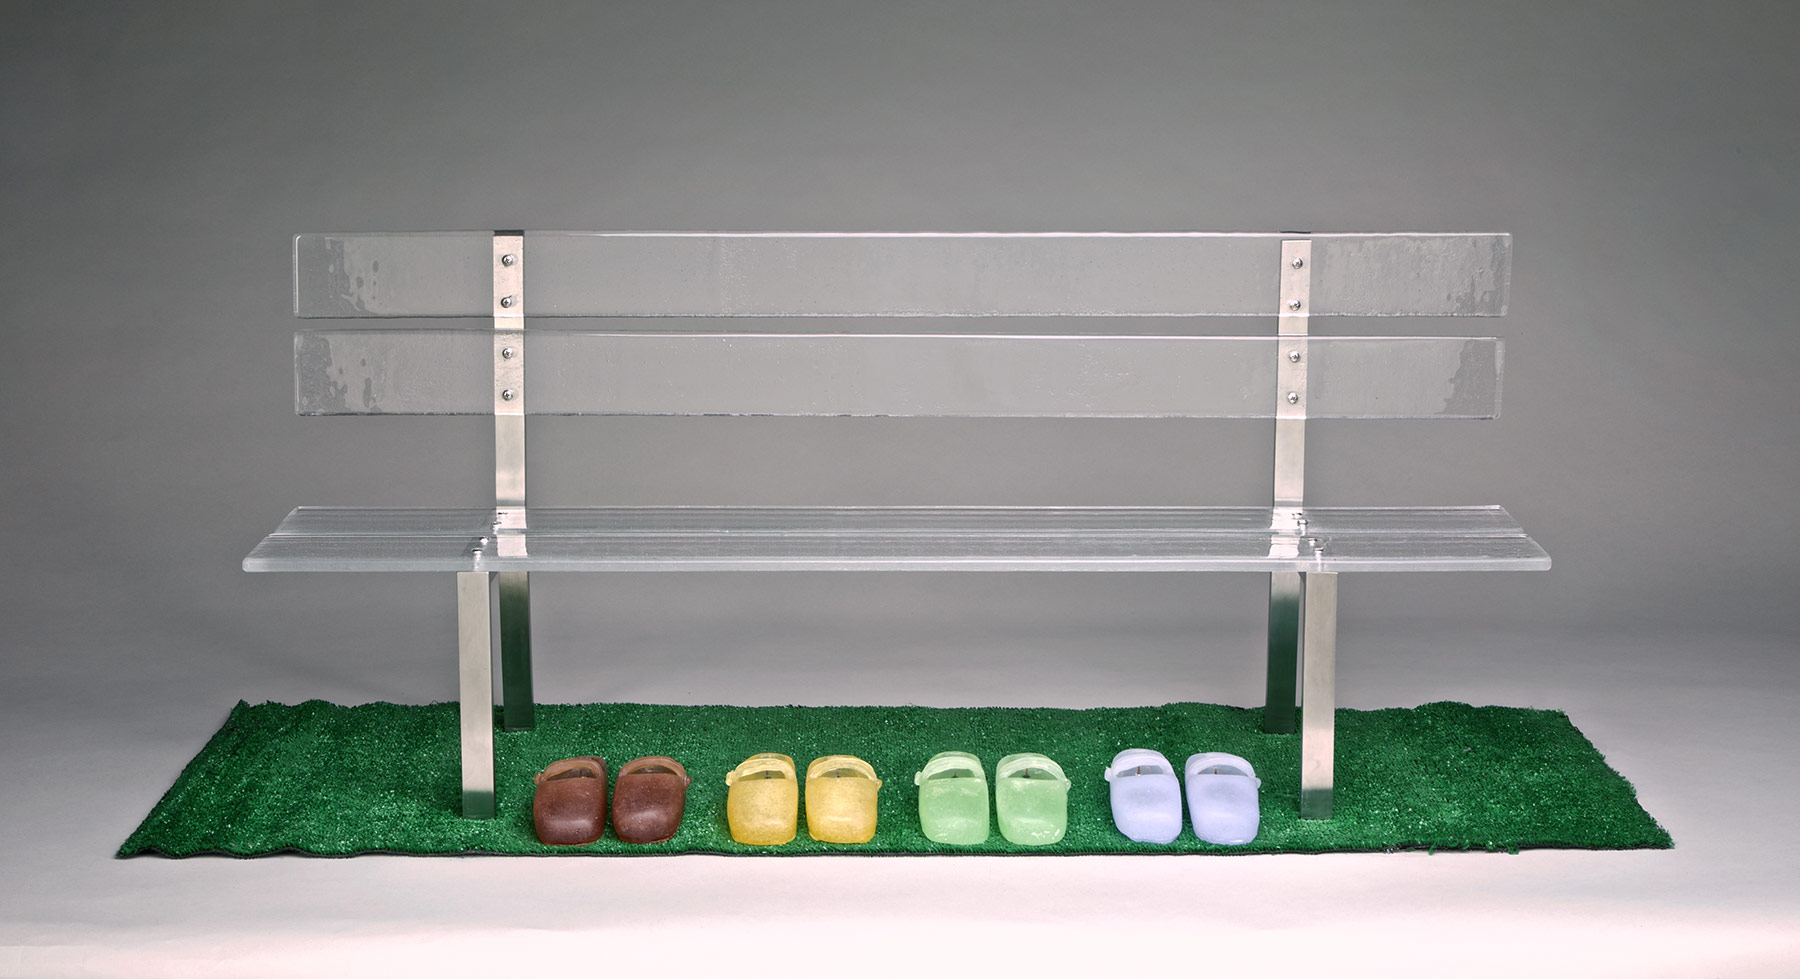 Metal and glass bench and four multicolored pairs of glass shoes atop AstroTurf grass